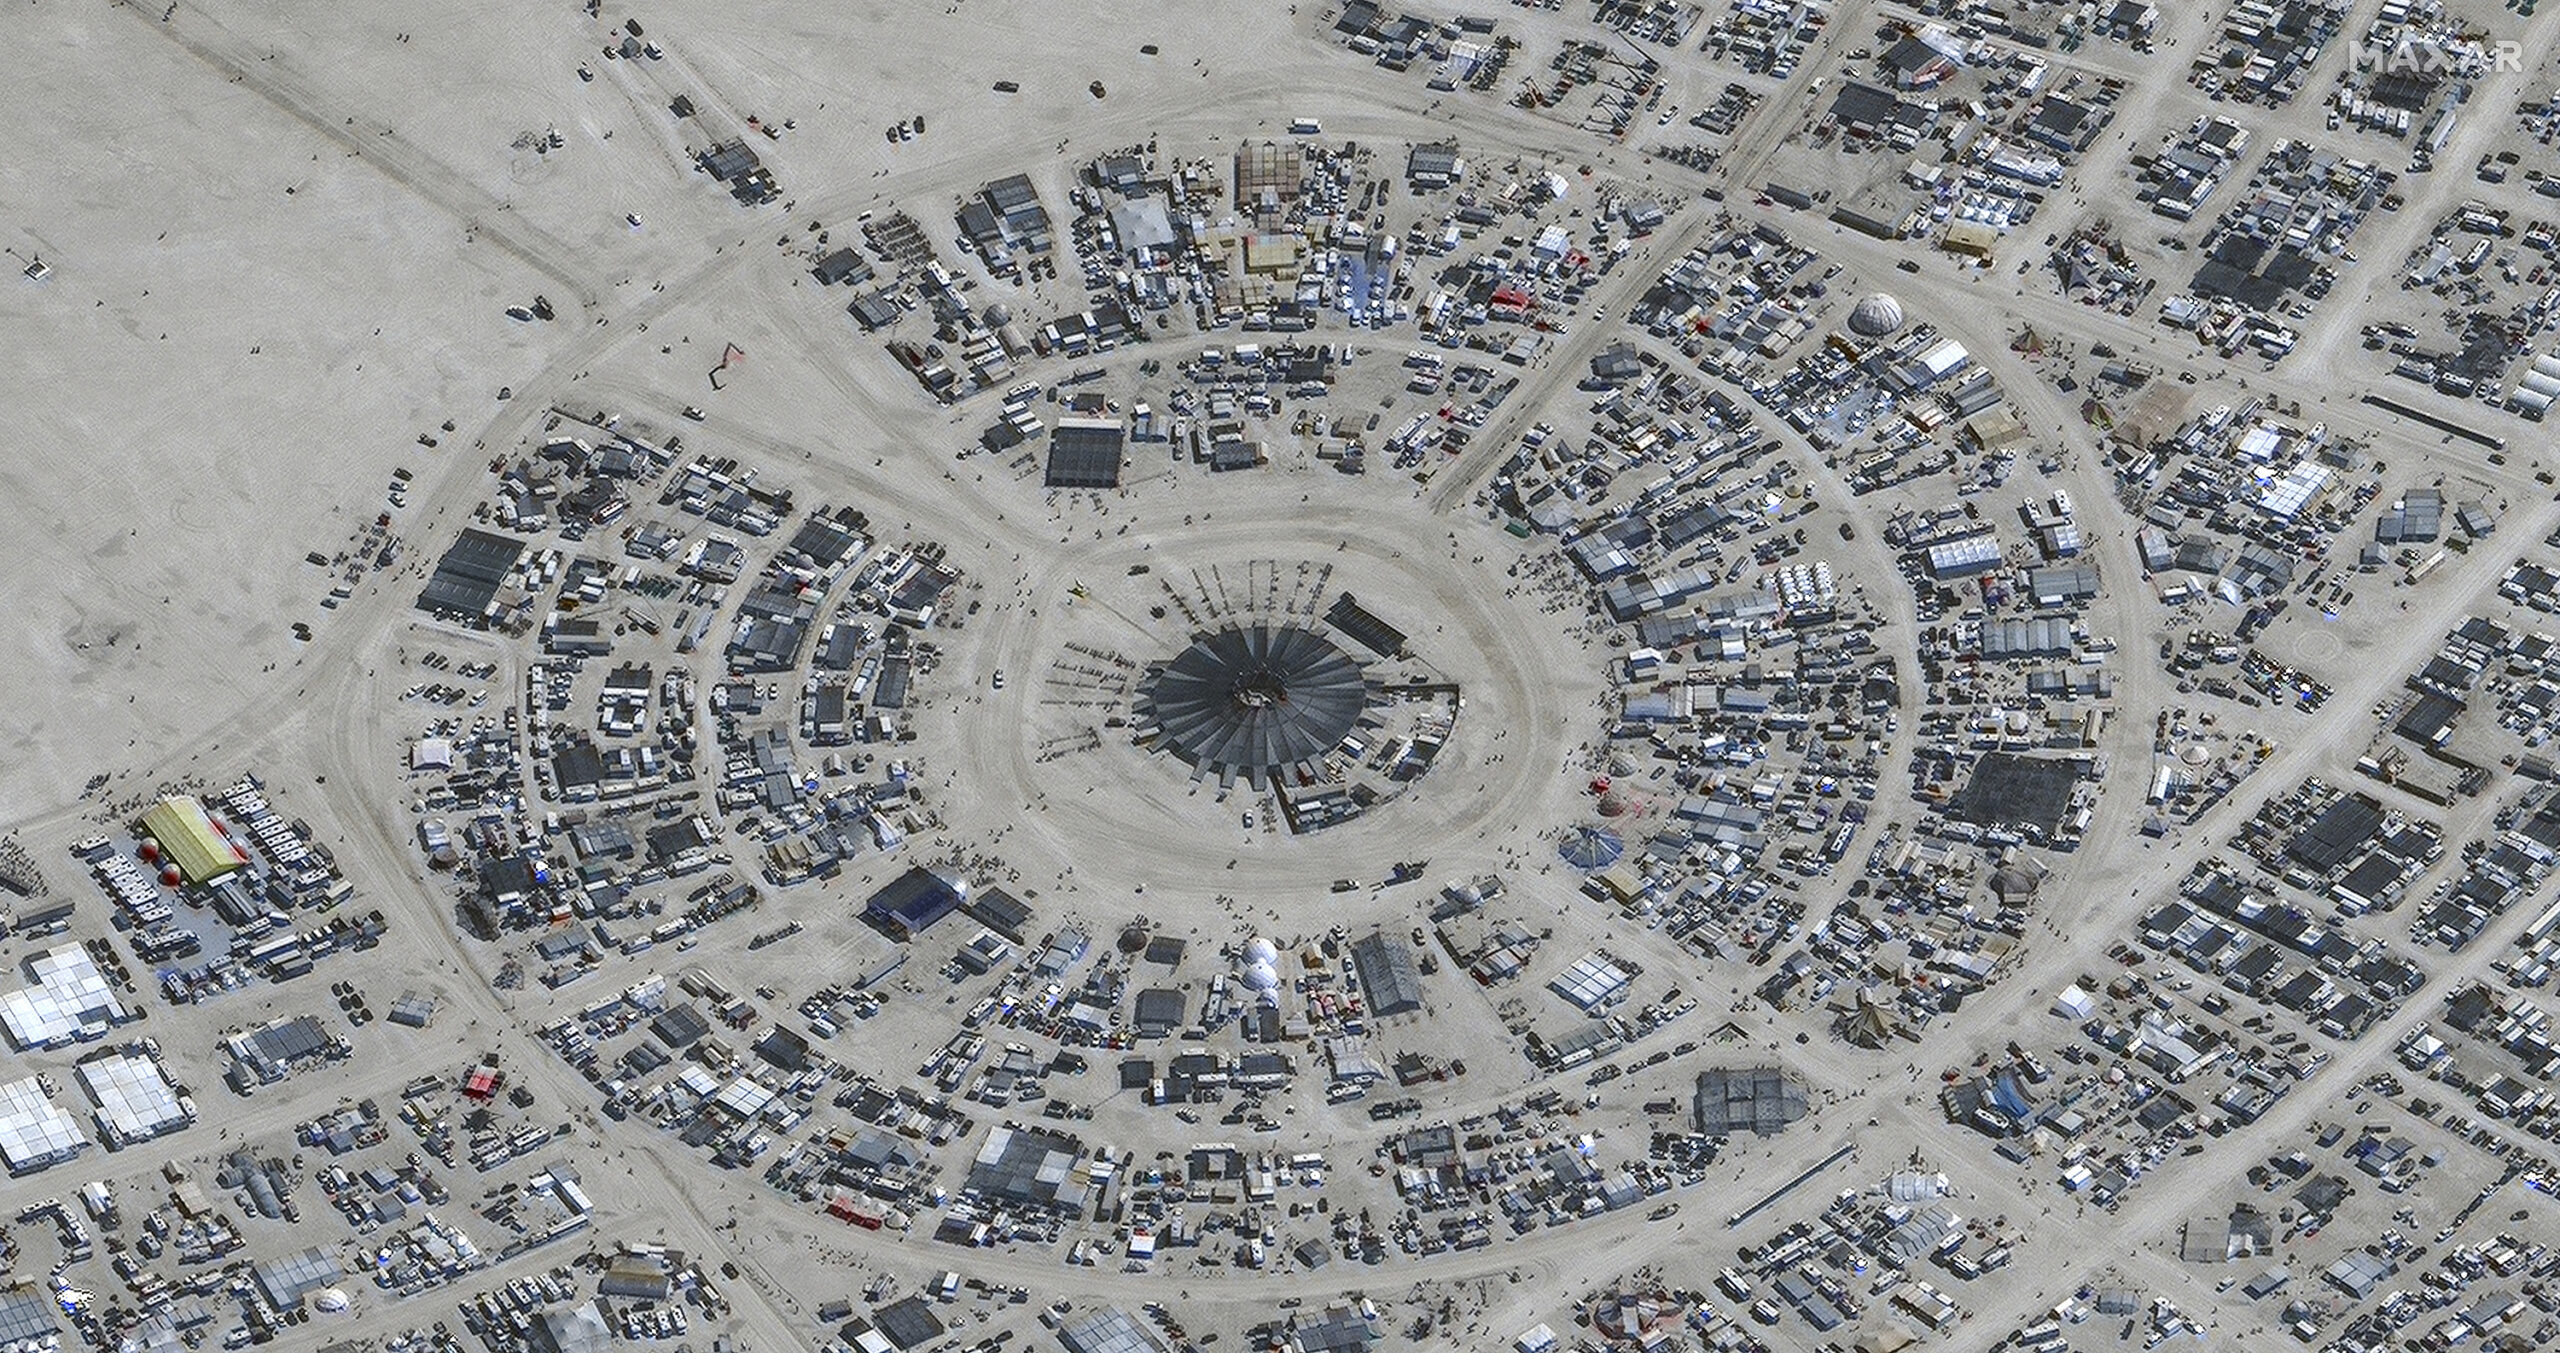 1 death reported at Burning Man while festival attendees remain stuck